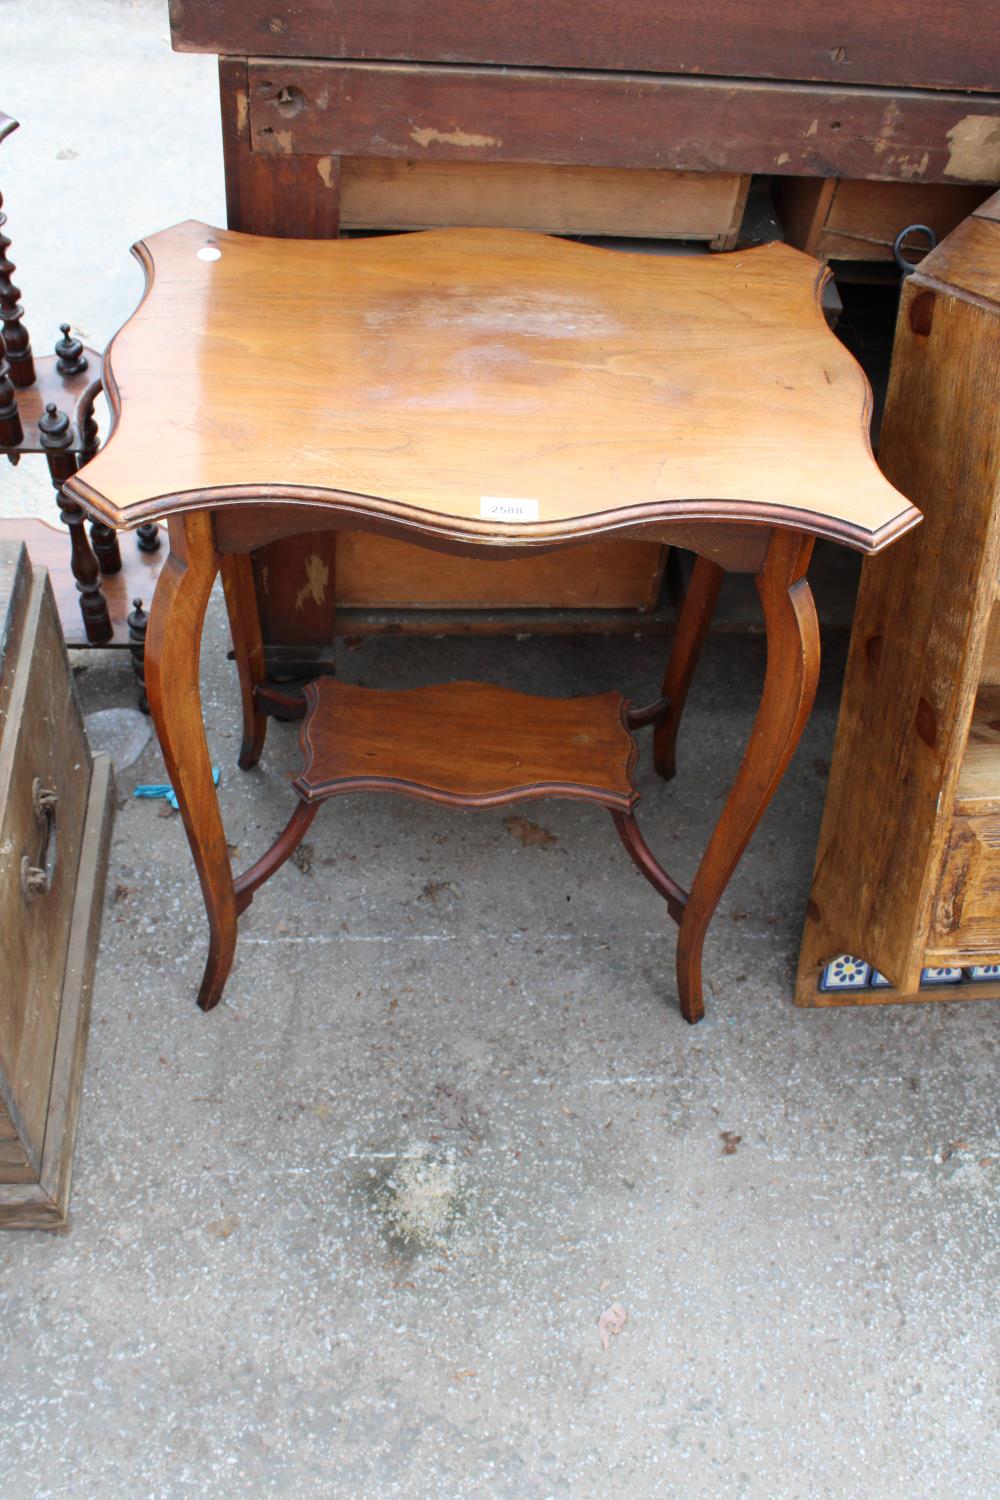 AN EDWARDIAN MAHOGANY TWO TIER CENTRE TABLE, 23" X 16"